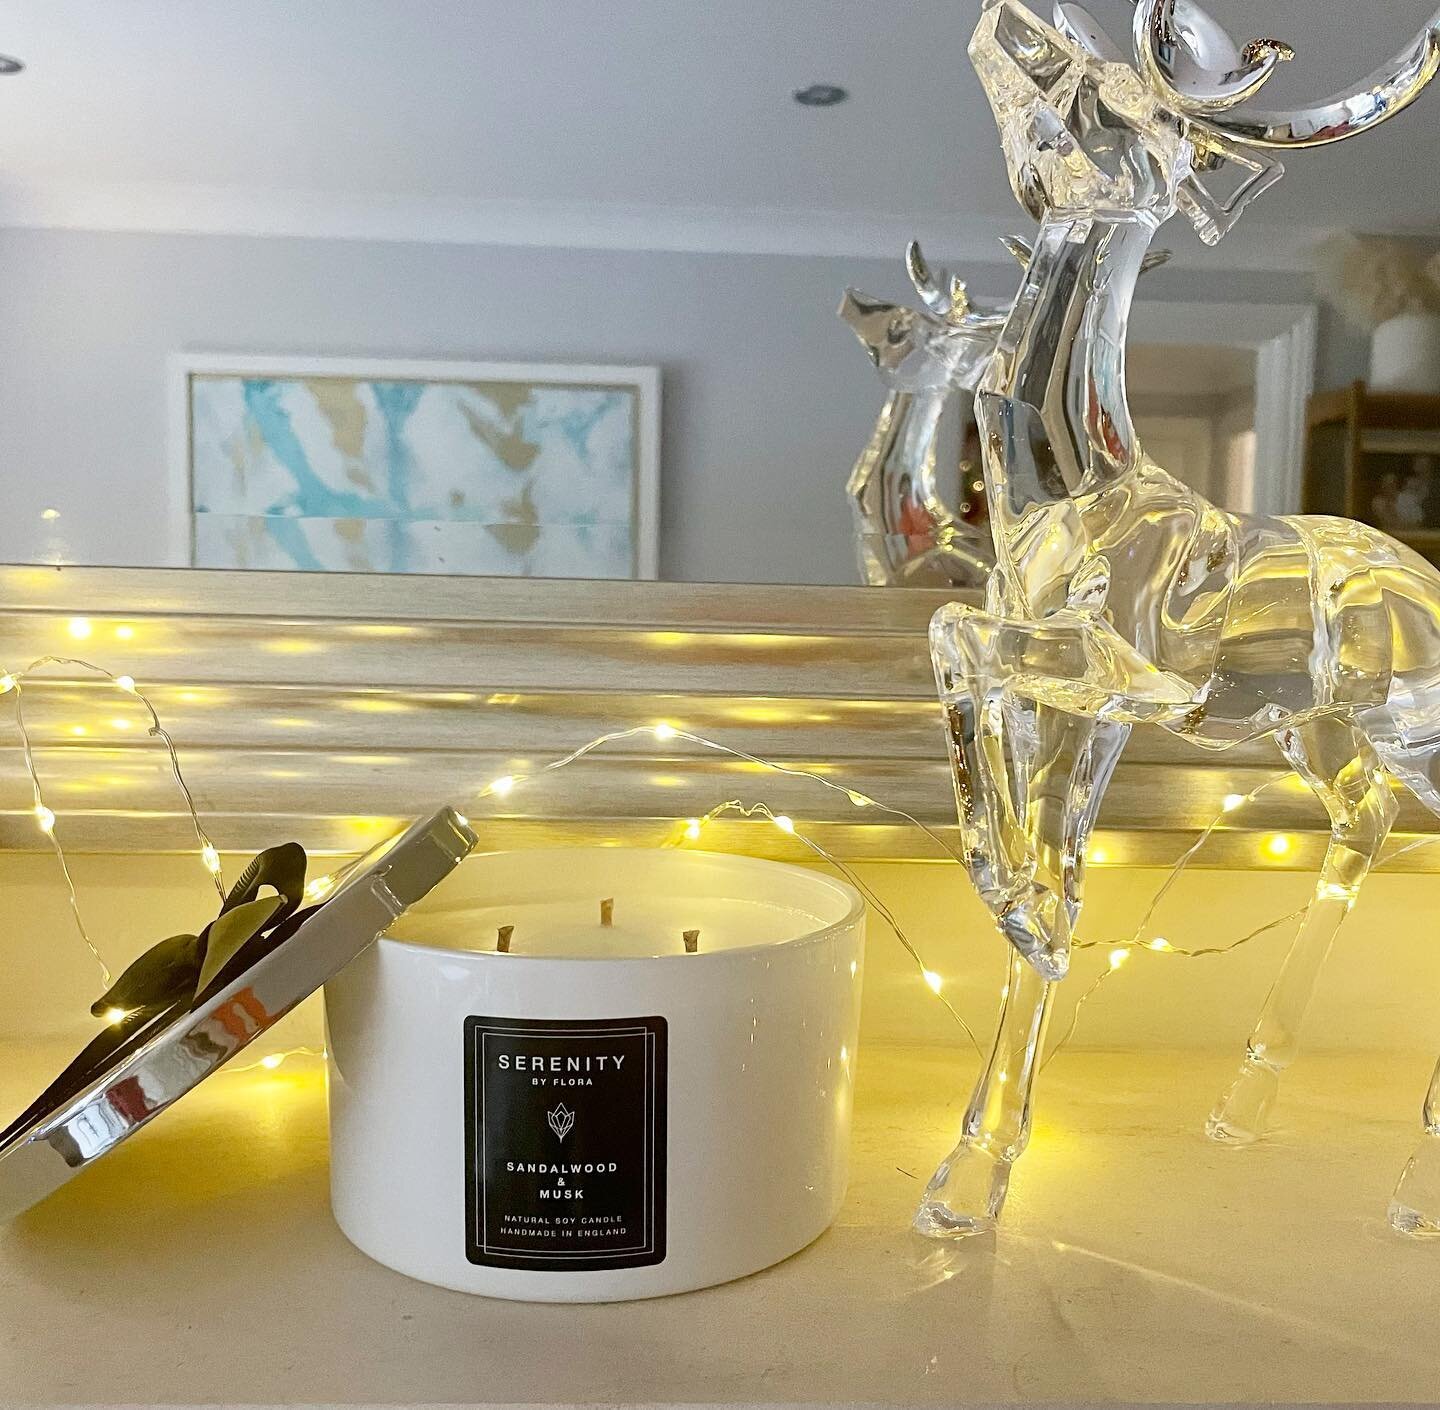 ✨Getting into the festive mood ✨

Our Soy Candles are handmade with the finest and purest ingredients&hellip;🌱

They are vegan, paraben &amp; phthalate free, therefore safe for humans, pets and the environment 🌱

Discover the full collection at www